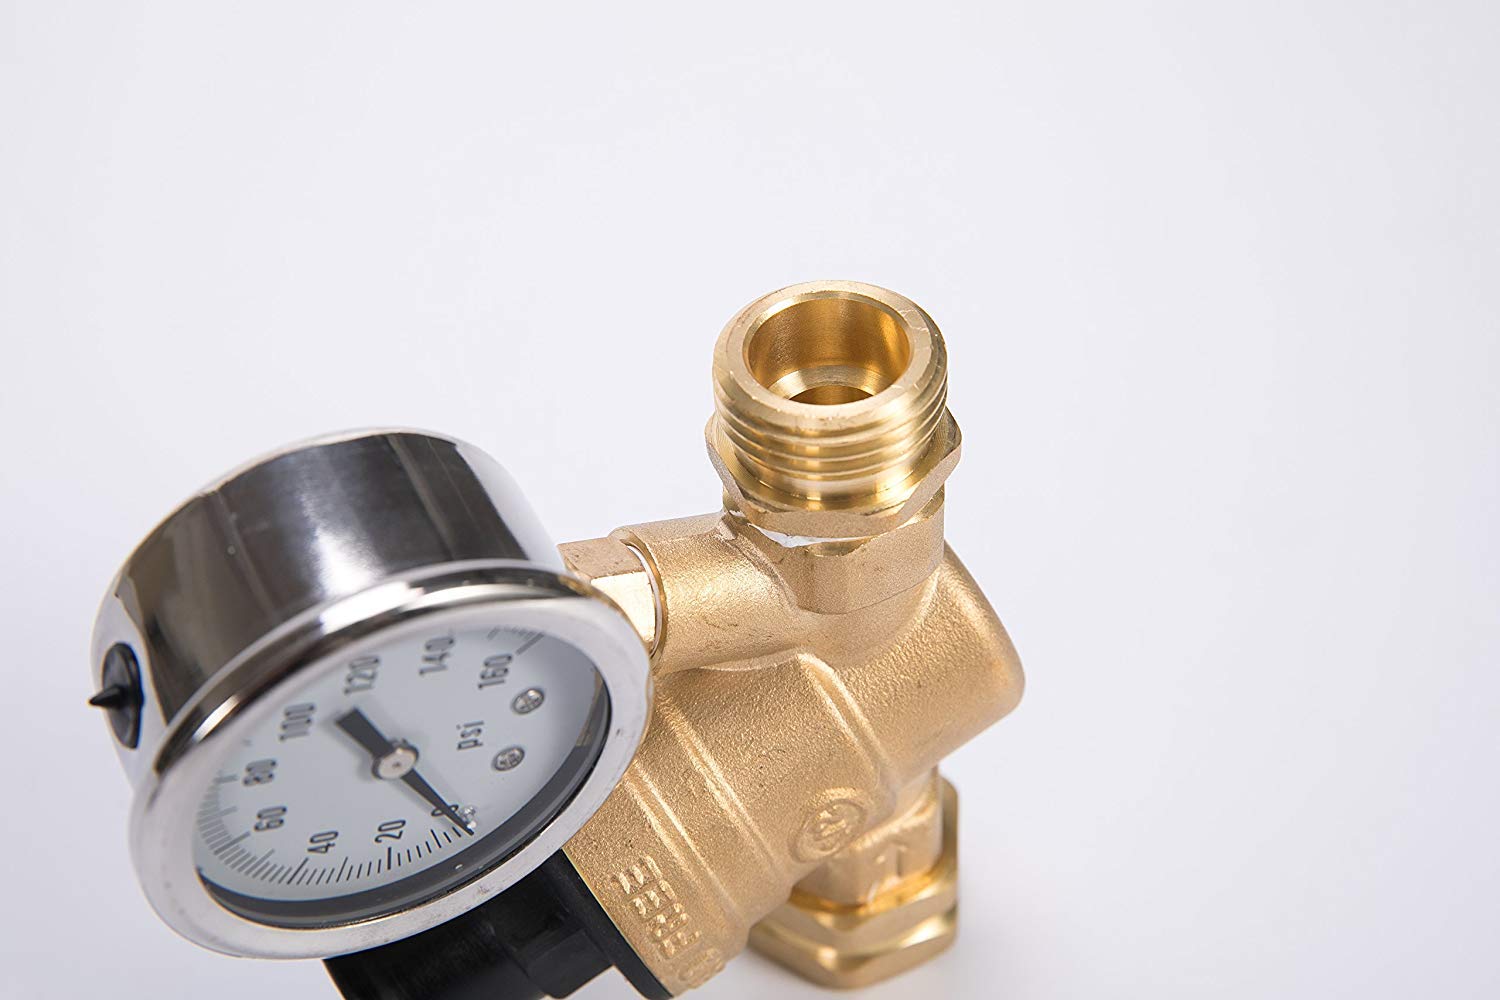 Water Pressure Regulator Valve Lead-free Brass Adjustable Water Pressure  Regulator Reducer With 0-160psi Gauge And Inlet Screened Filter For Rv  Travel